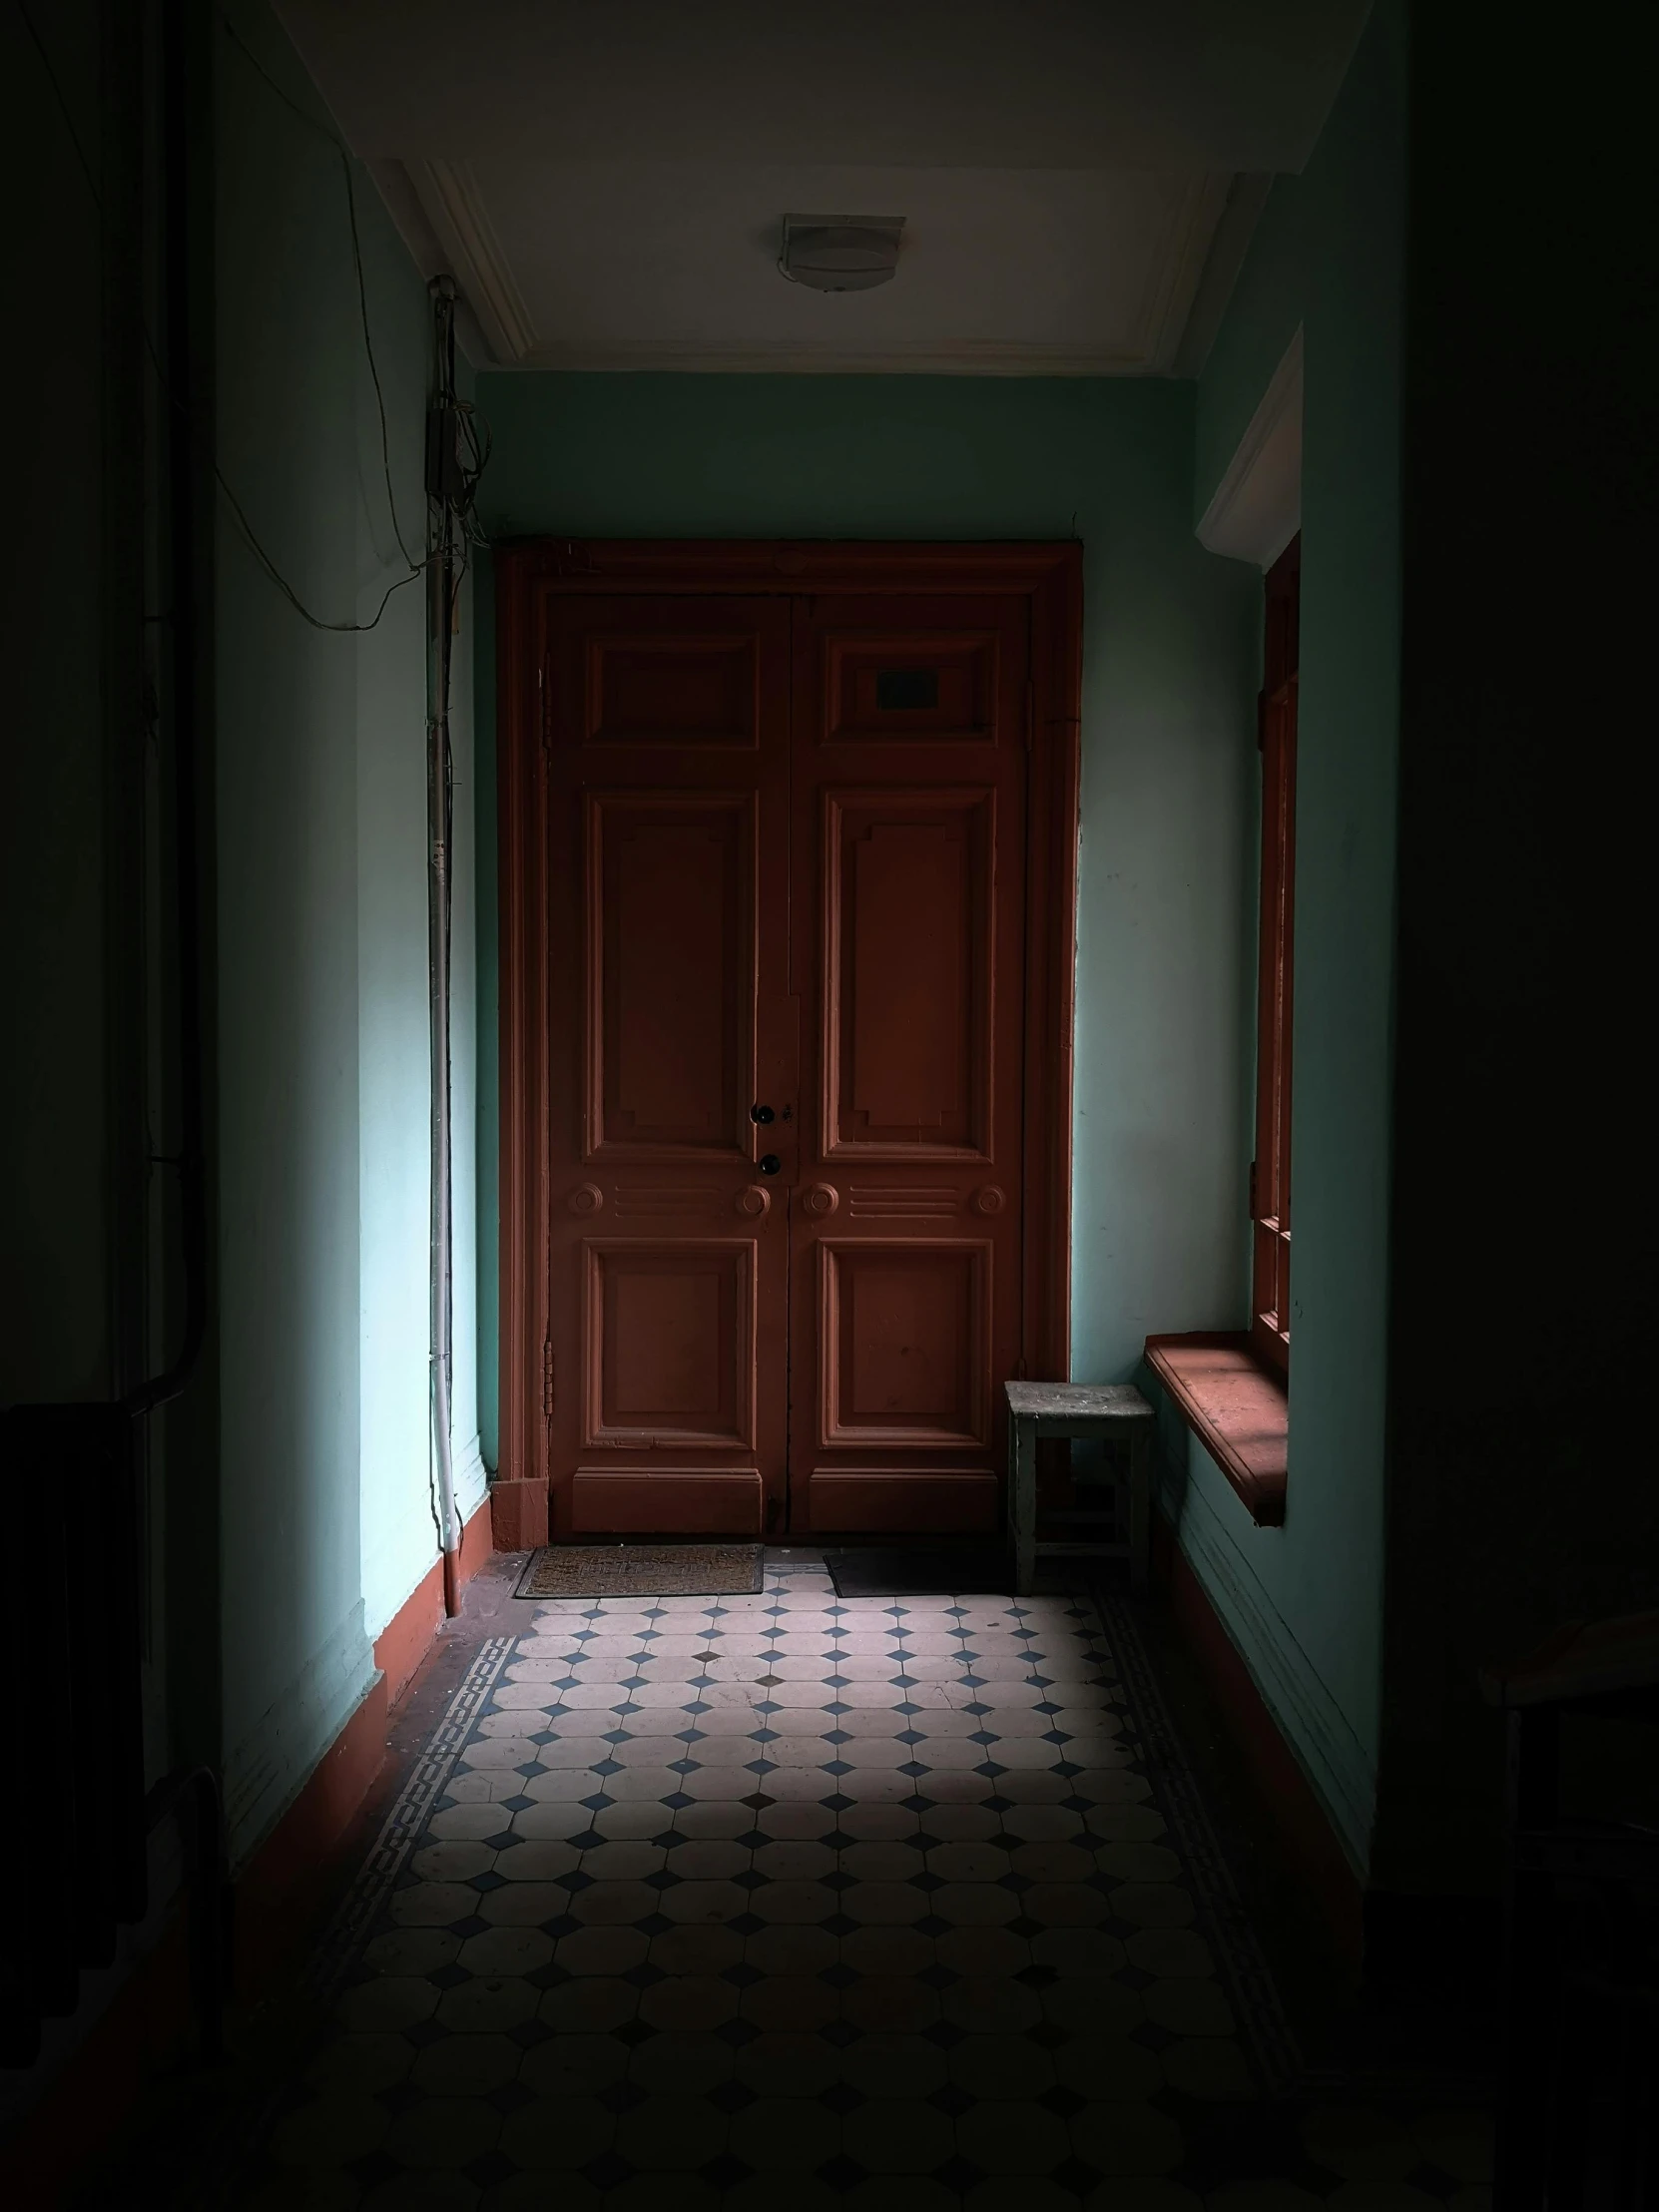 a dimly lit room with some doors and windows